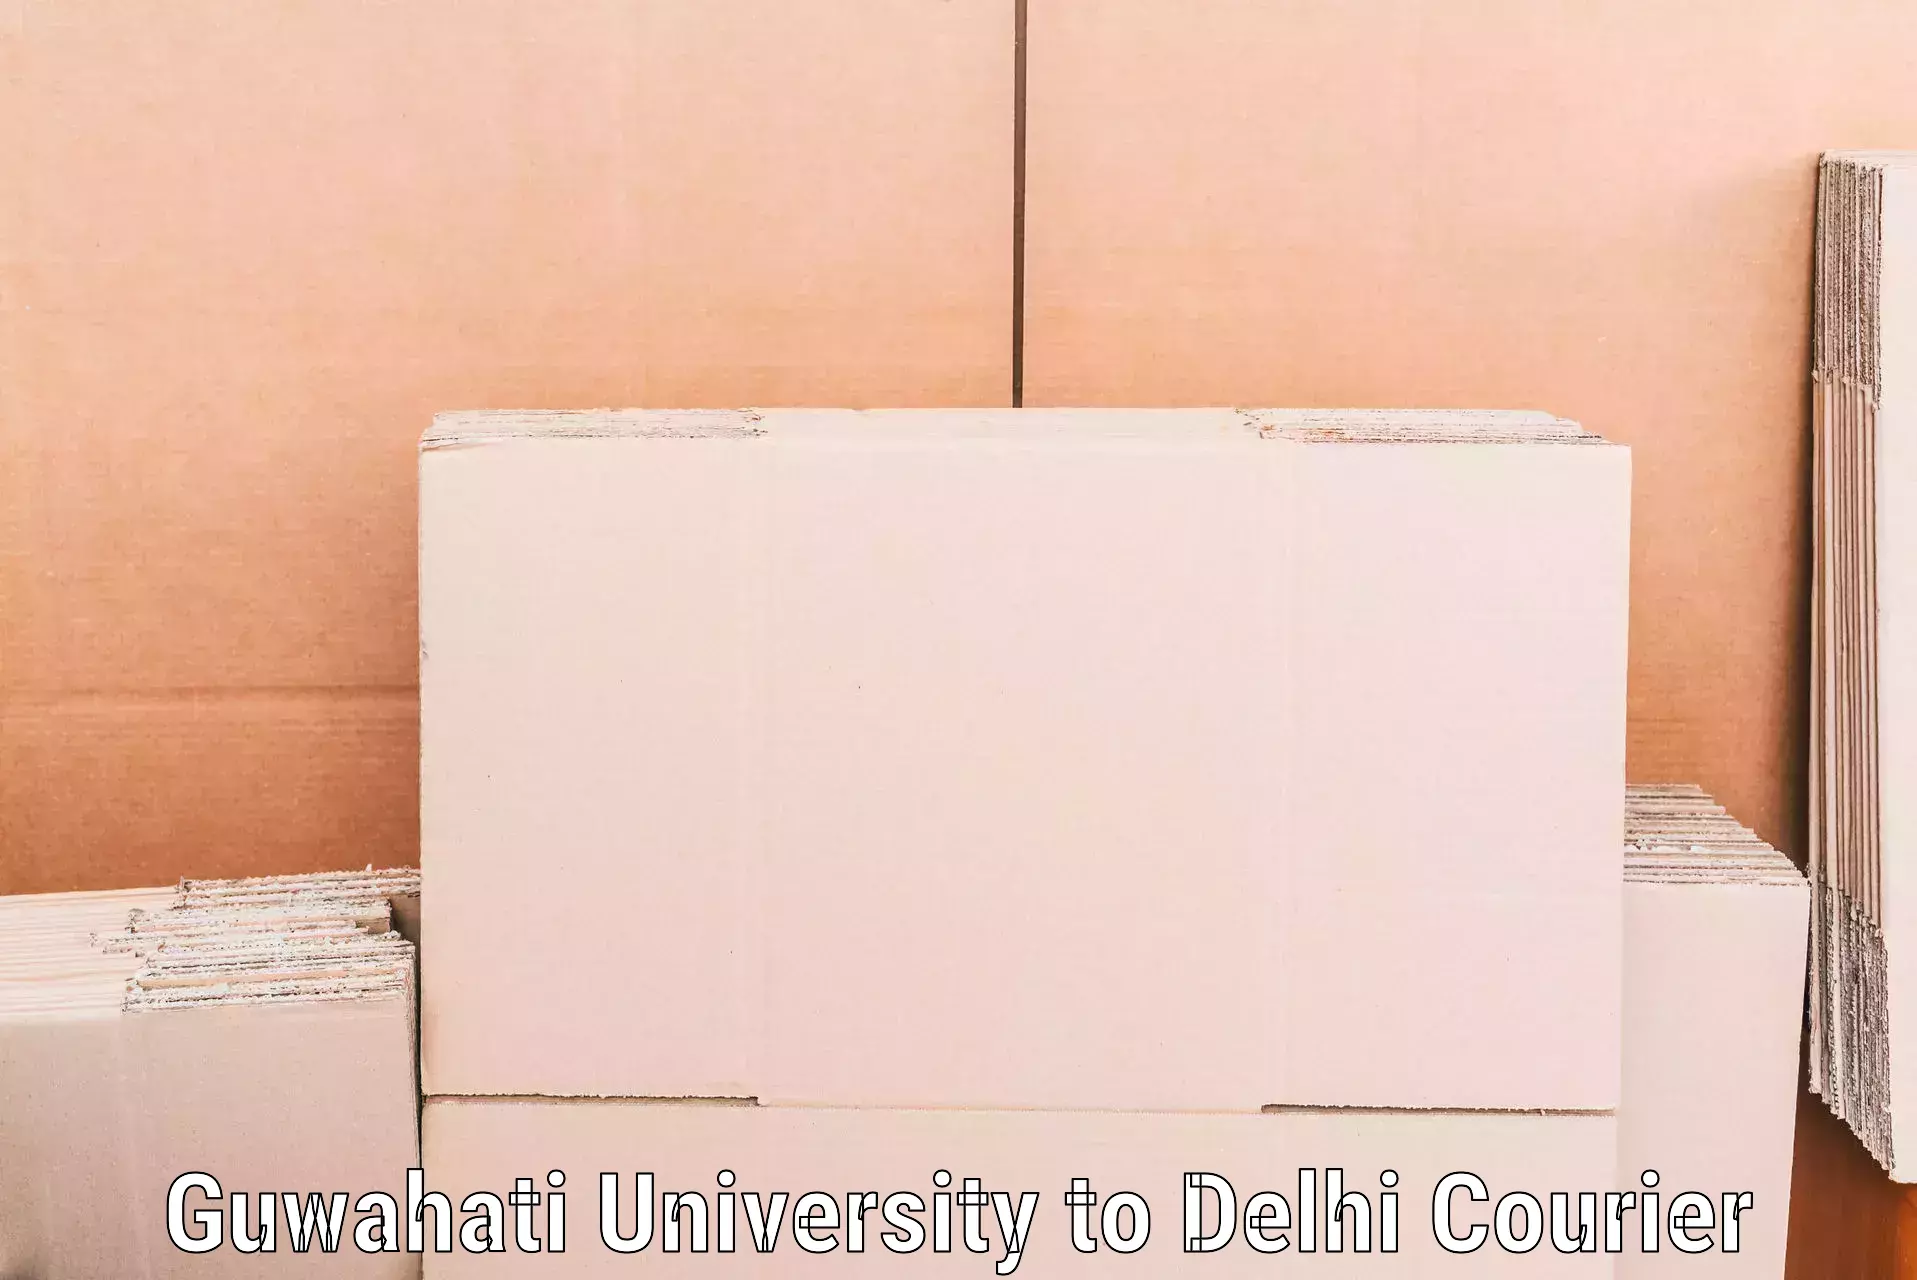 High-quality moving services Guwahati University to Lodhi Road